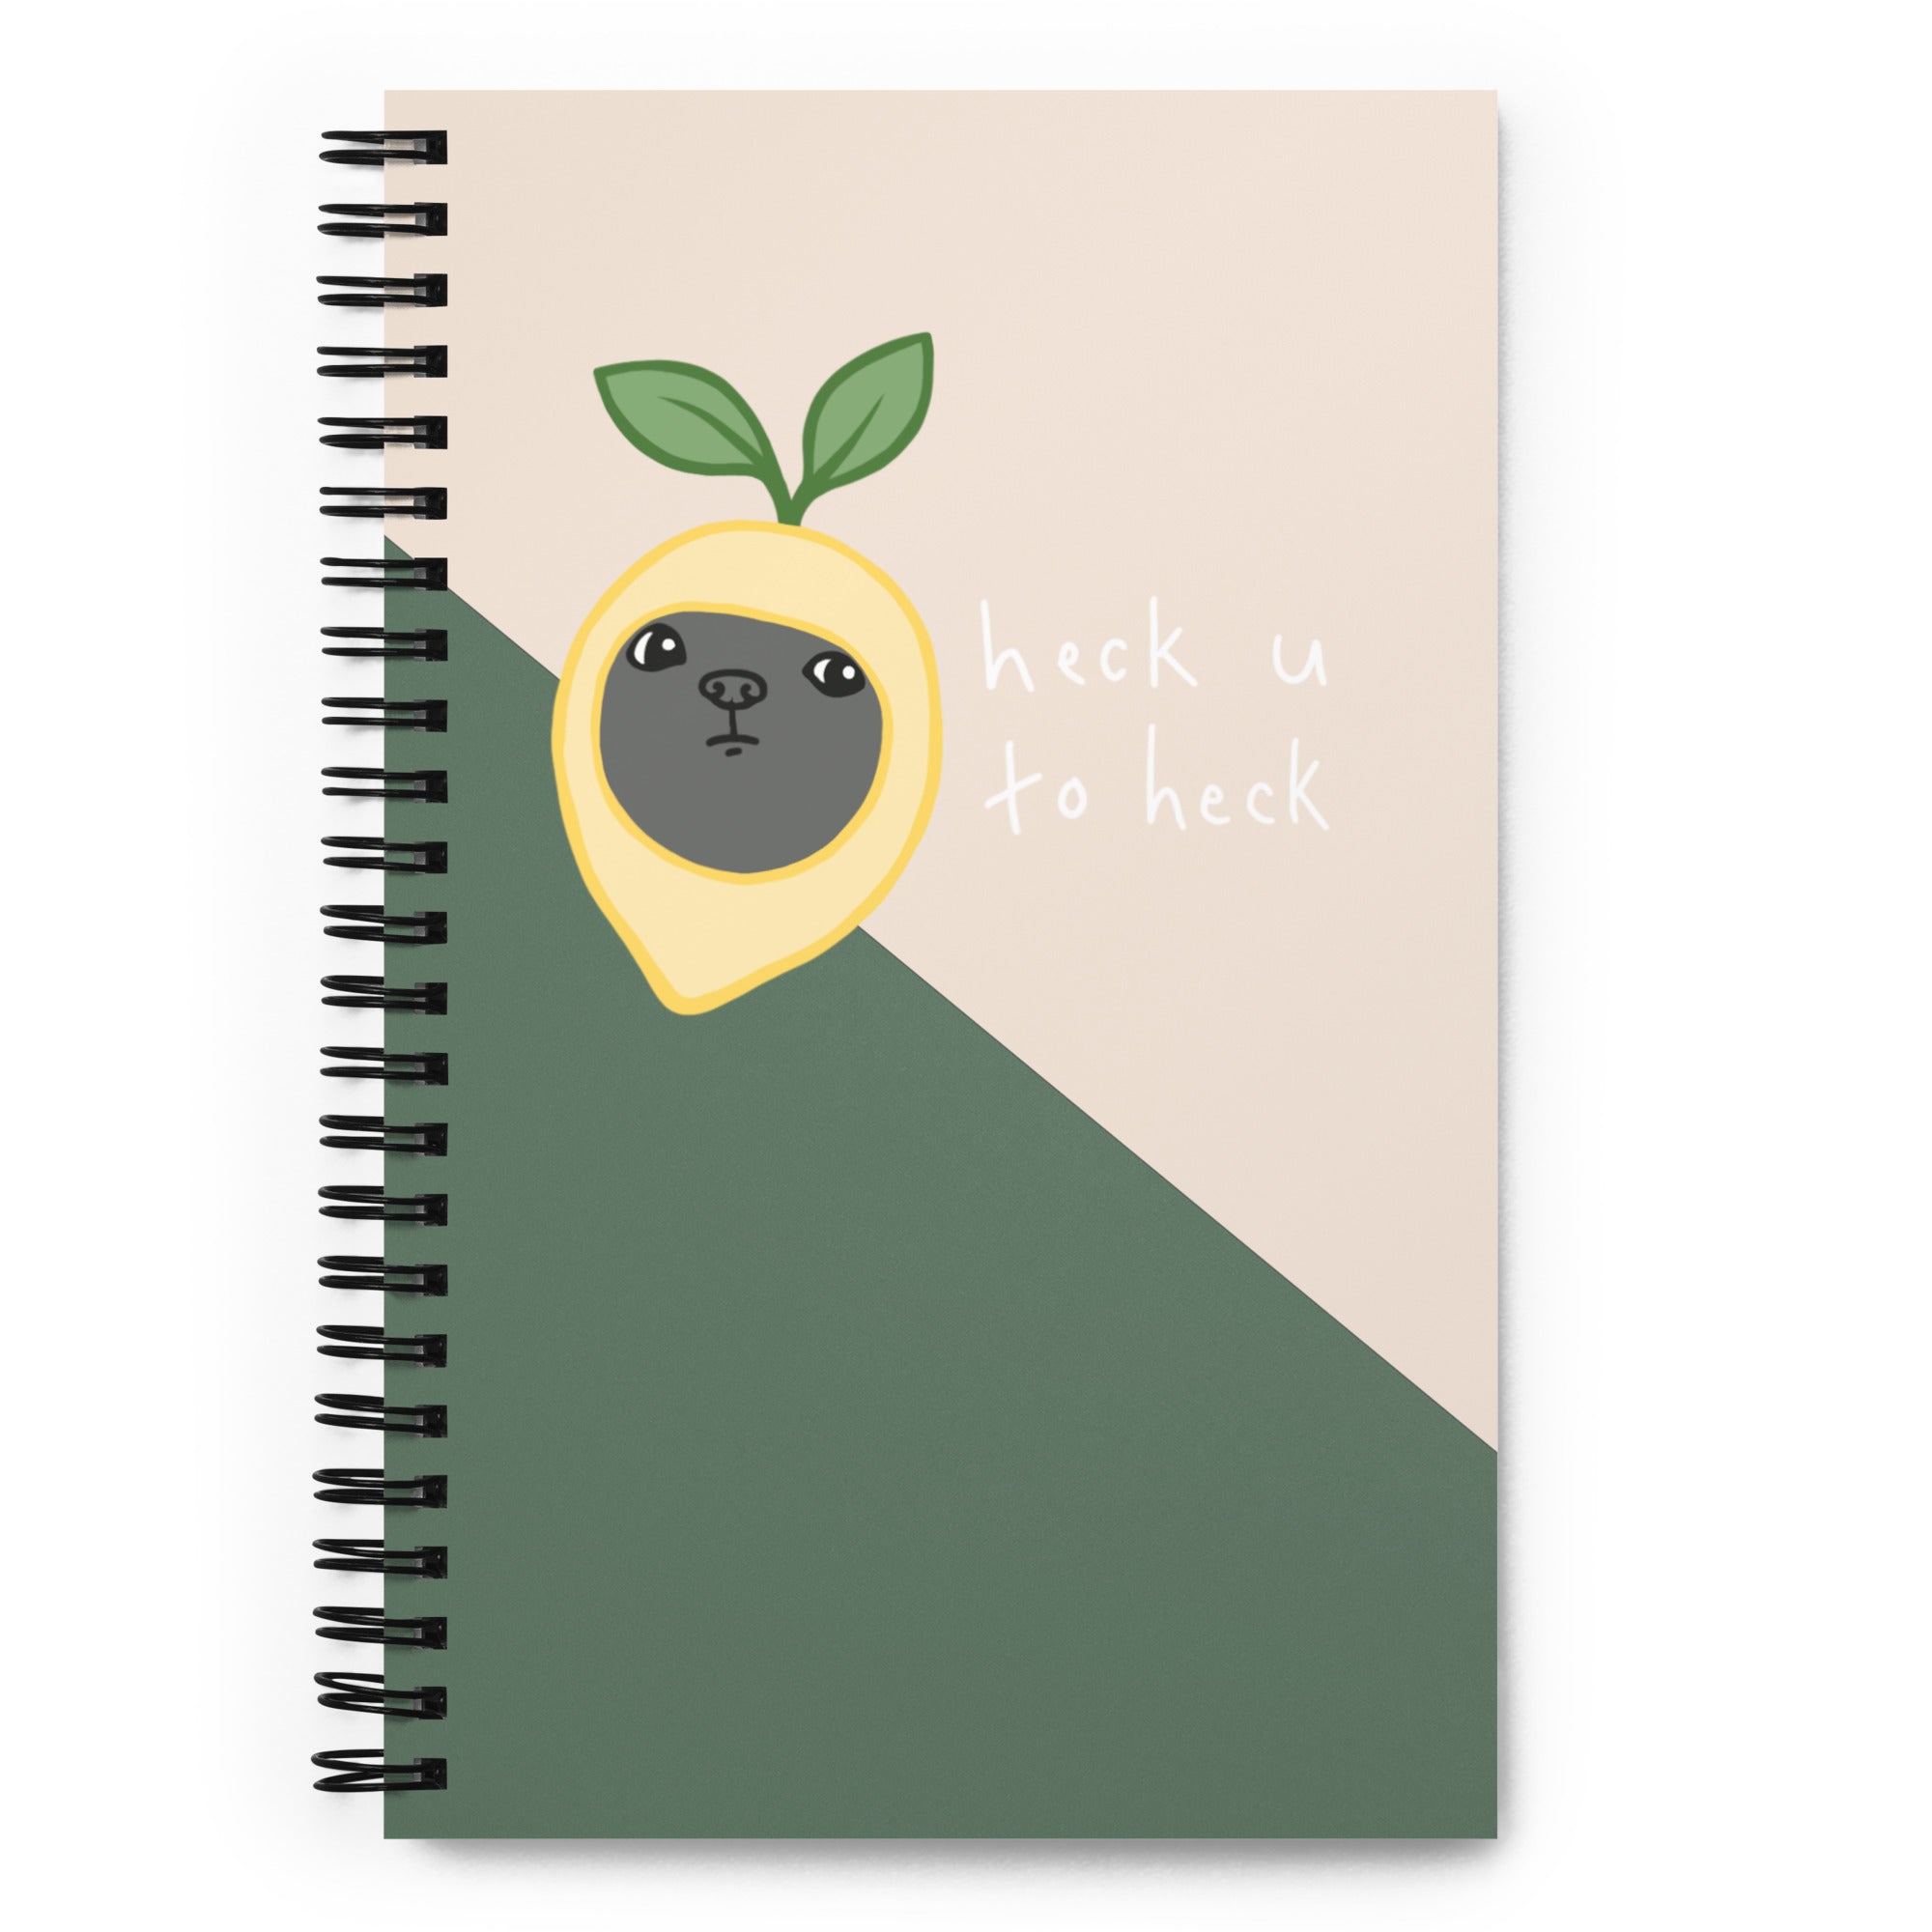 "Heck You To Heck" Spiral notebook